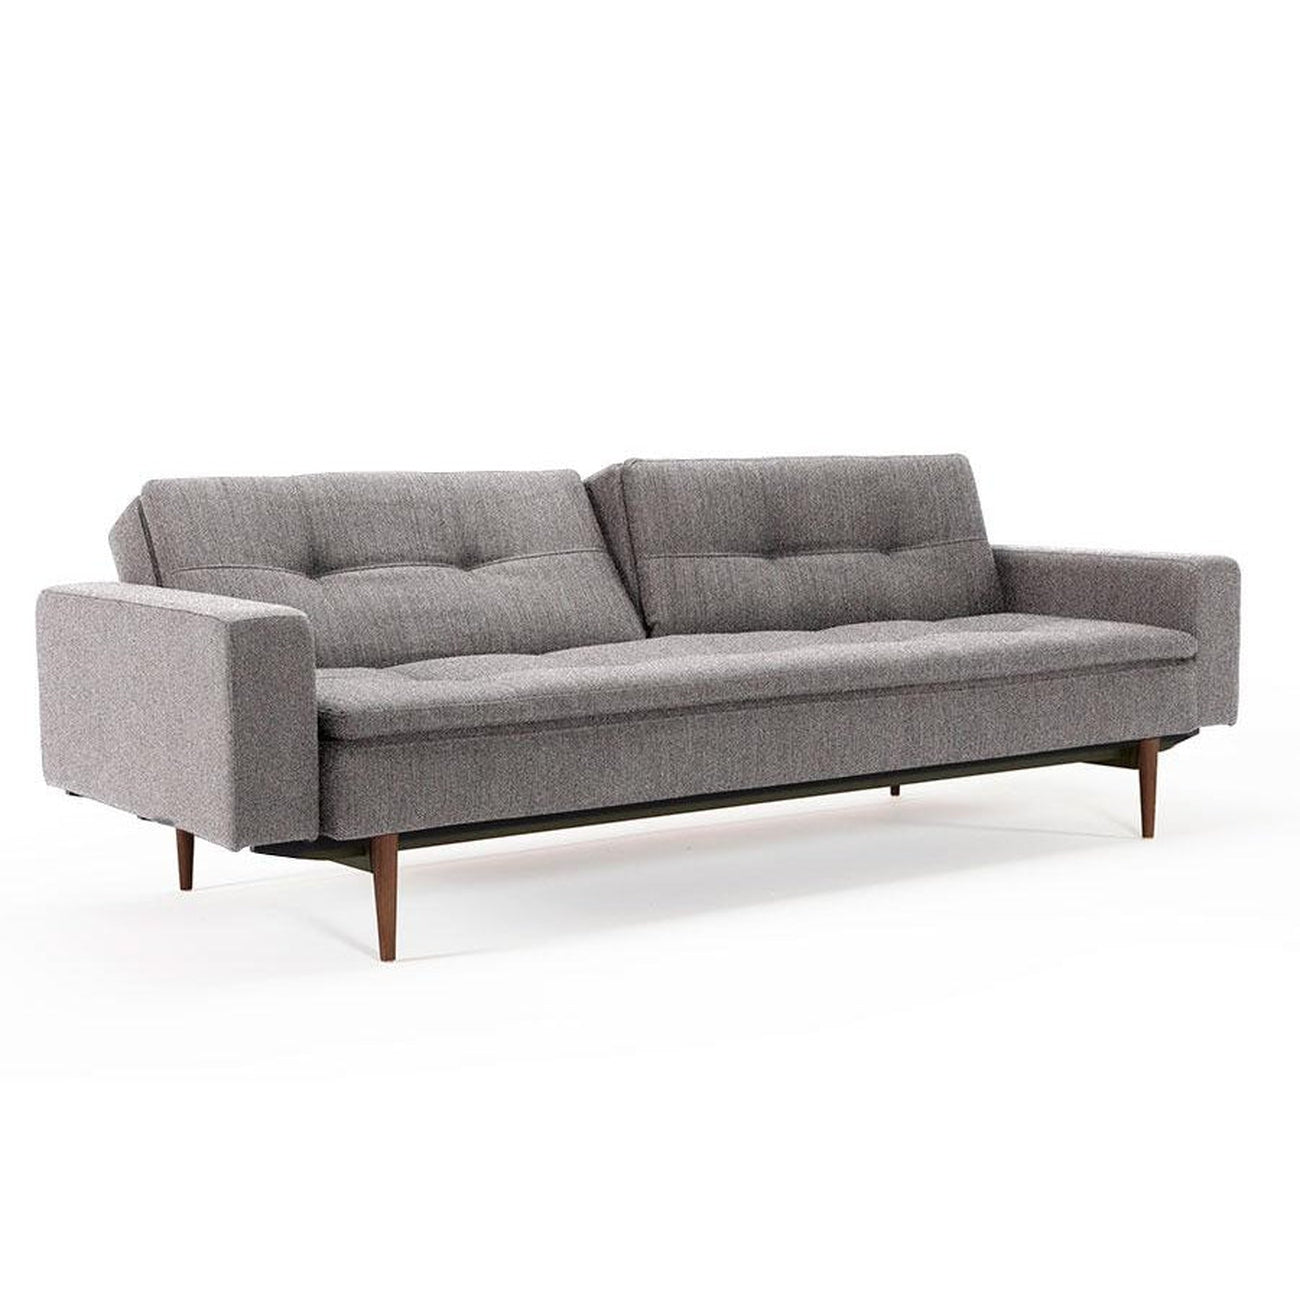 Dublexo Deluxe Sofa W/Arms,DARK WOOD-Innovation Living-INNO-94-741050020527-10-3-SofasMixed Dance Natural-11-France and Son